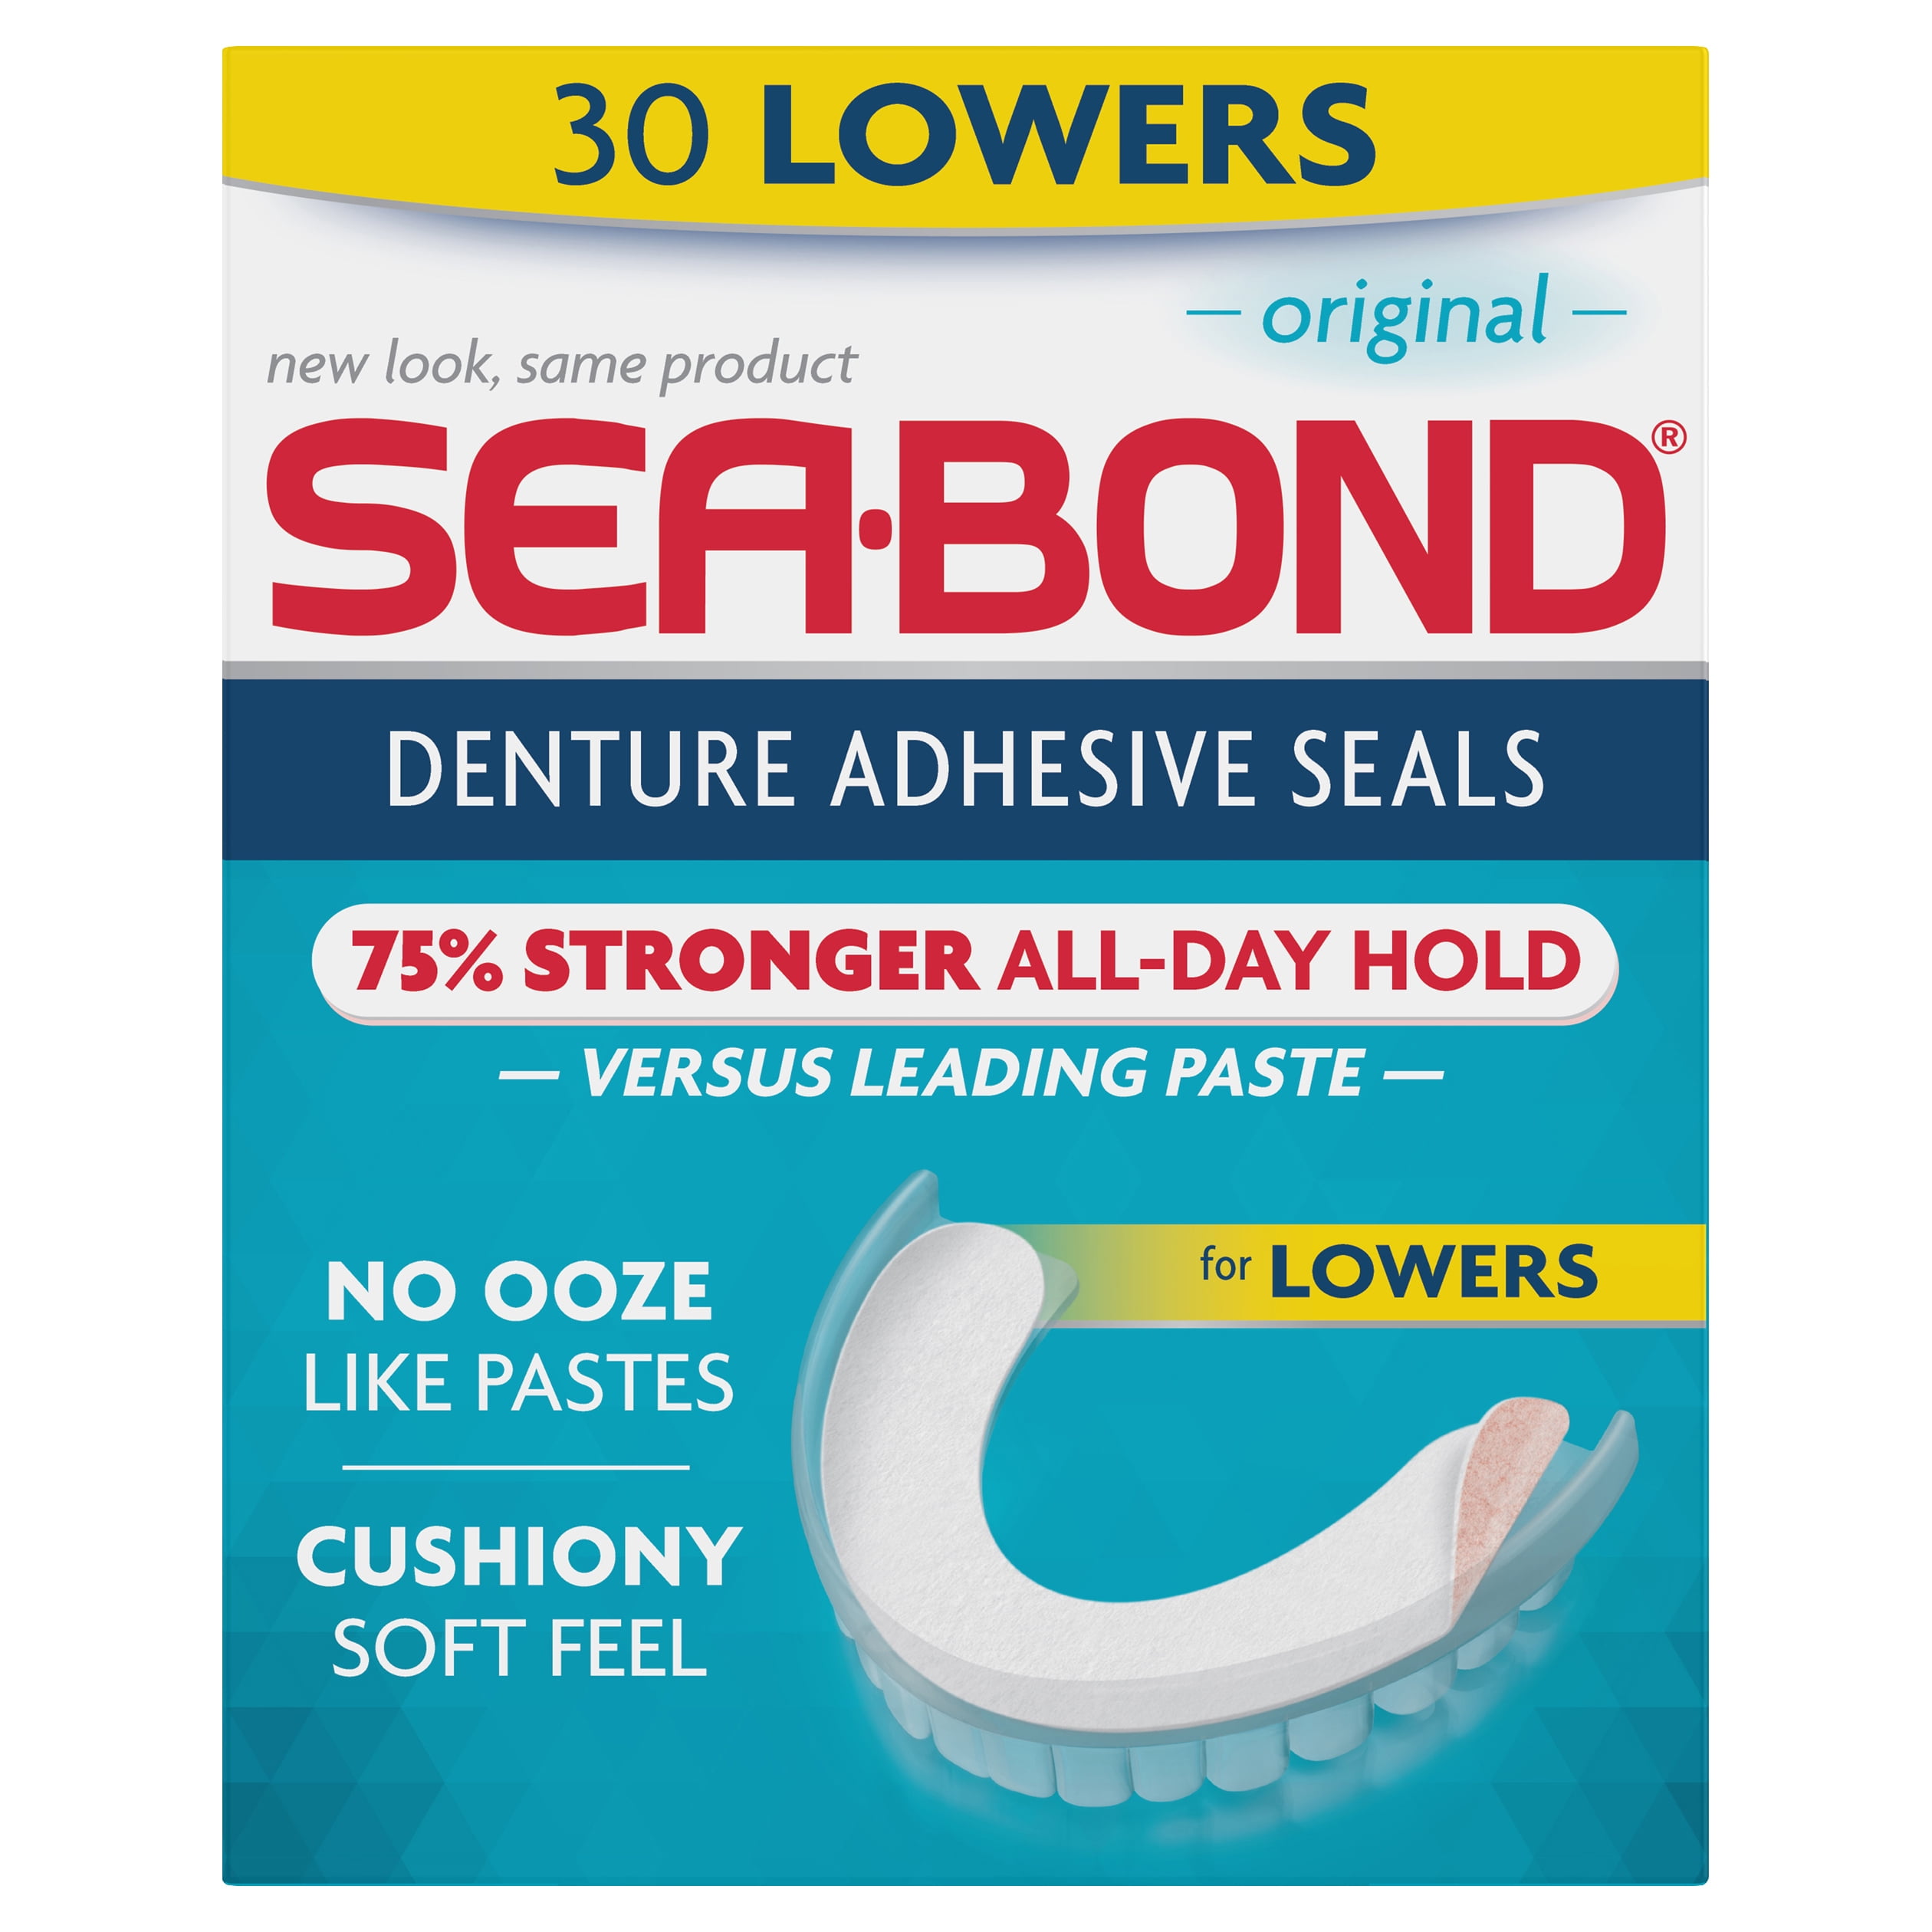 Sea-Bond Sea Bond Secure Denture Adhesive Seals, For an All Day Strong Hold, 30 Original Flavor Seals for Lower Dentures